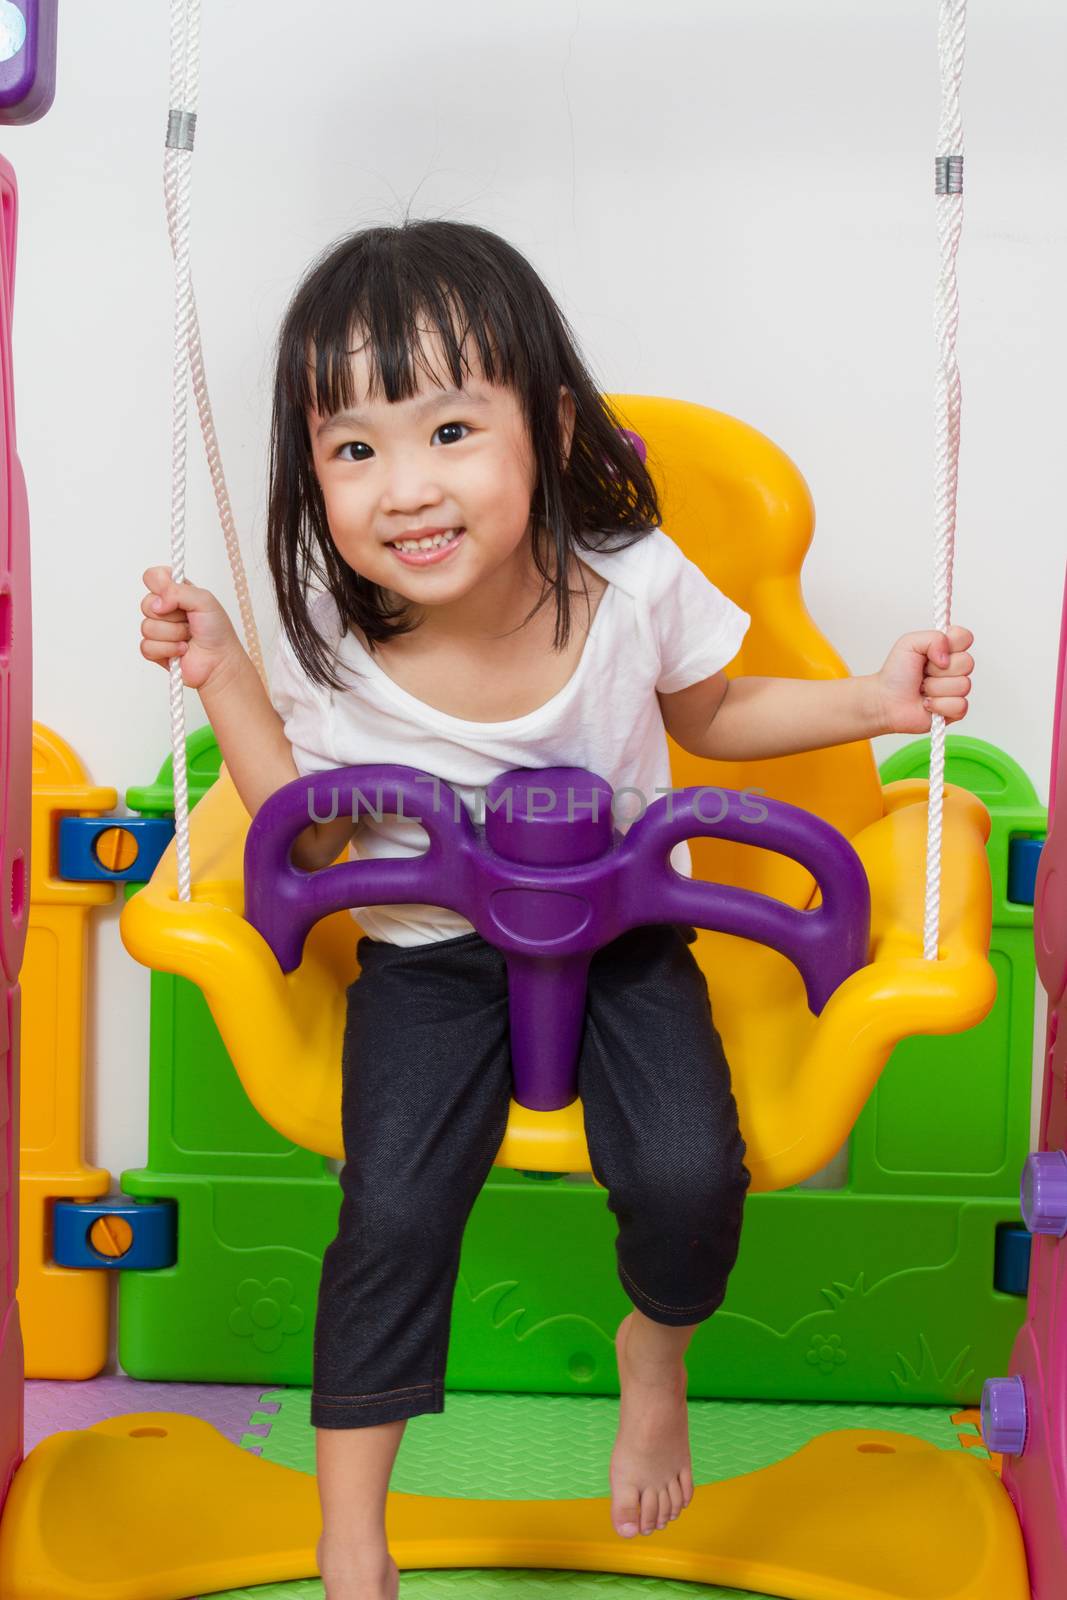 Asian Chinese children playing on swing at indoor playground.